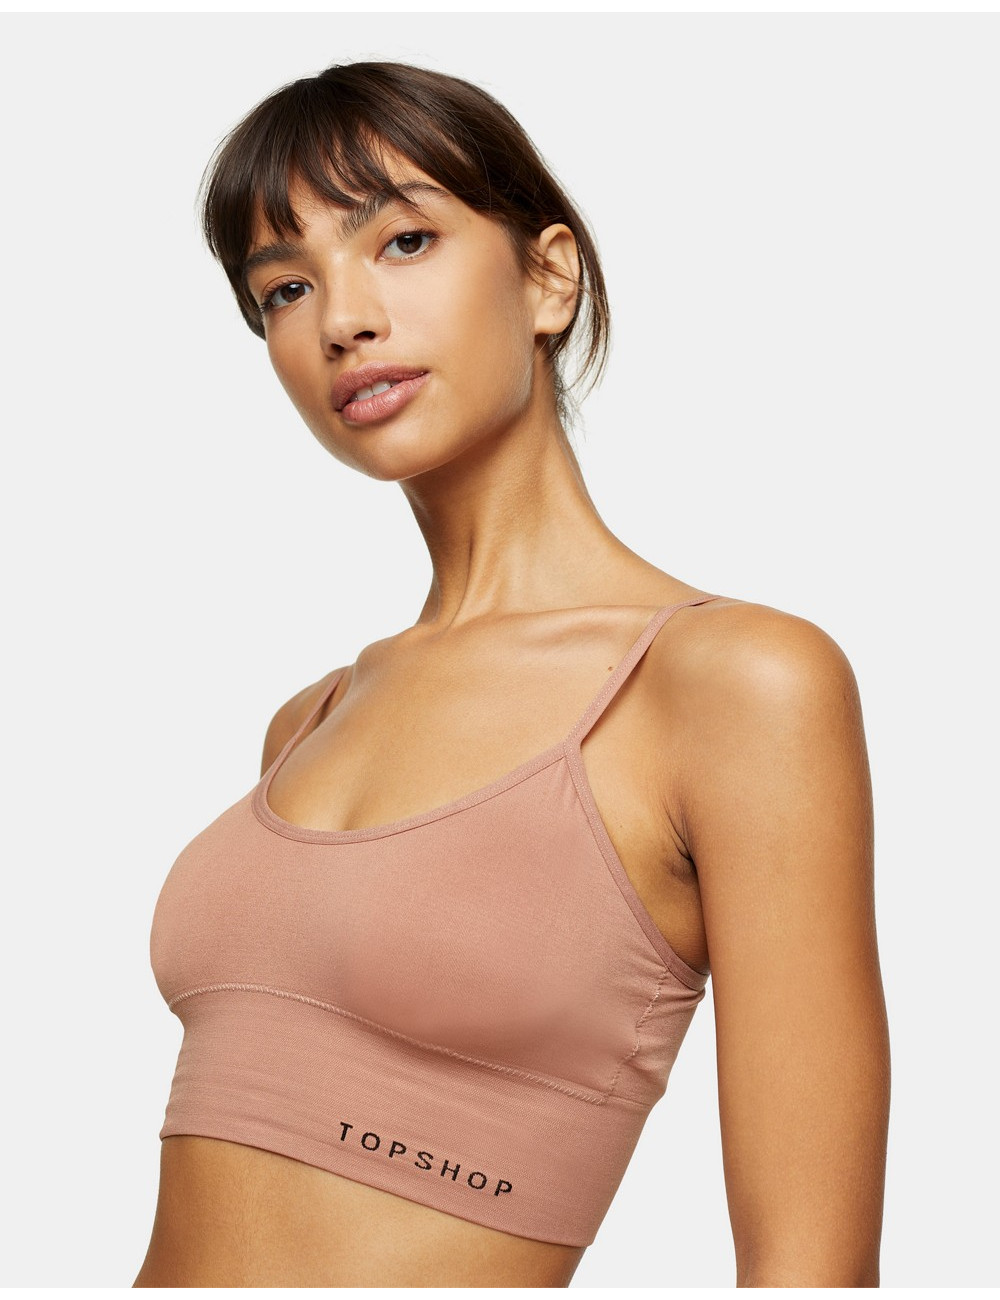 Topshop branded seamless...